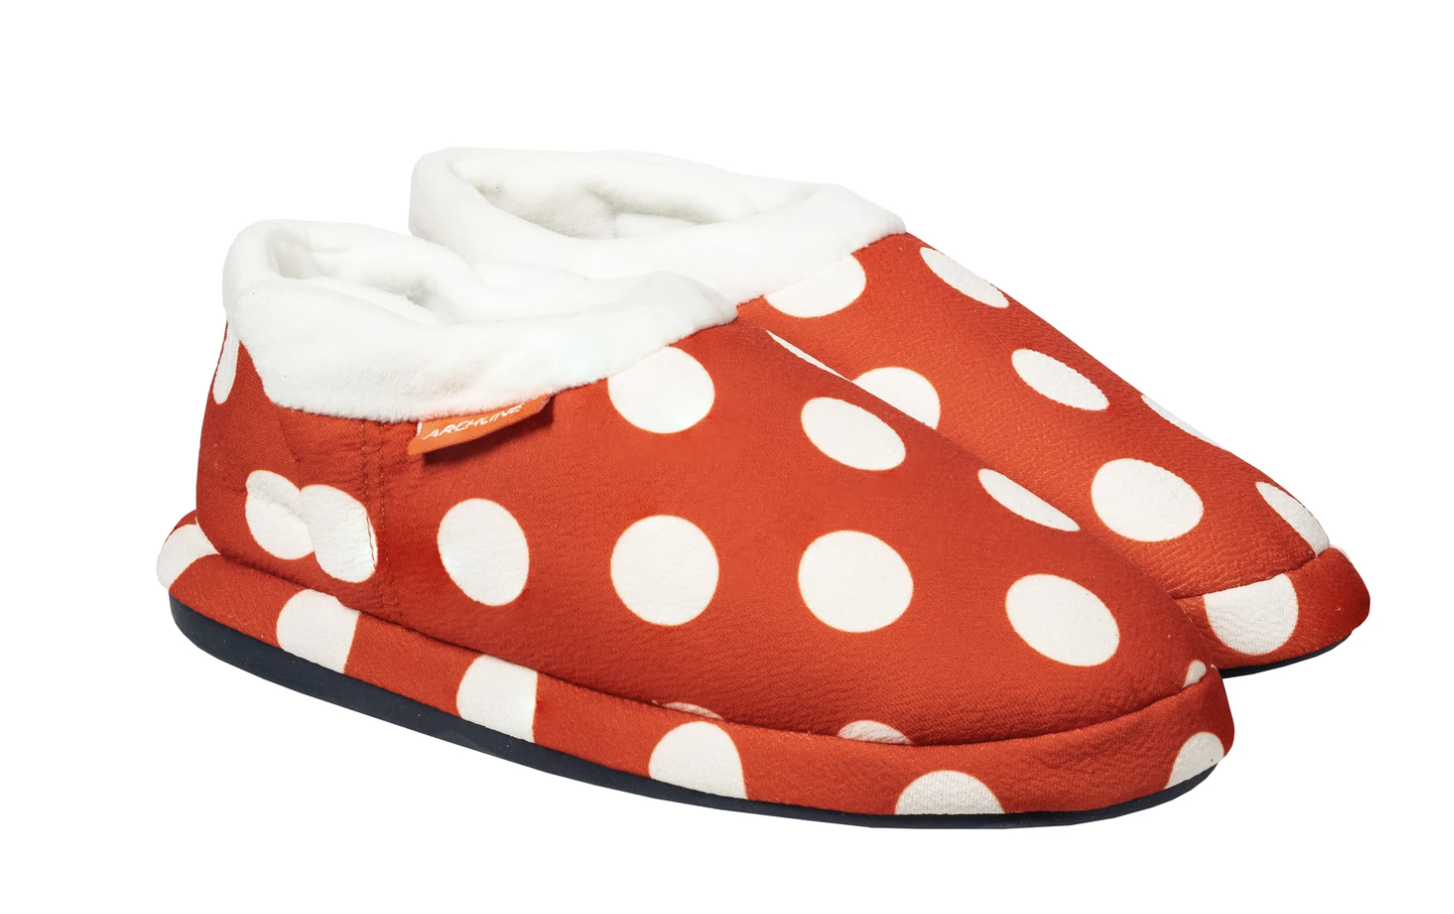 Orthotic Slippers CLOSED Back Scuffs Moccasins Pain Relief - Red Polka Dots - EUR 37 (Womens 6 US)